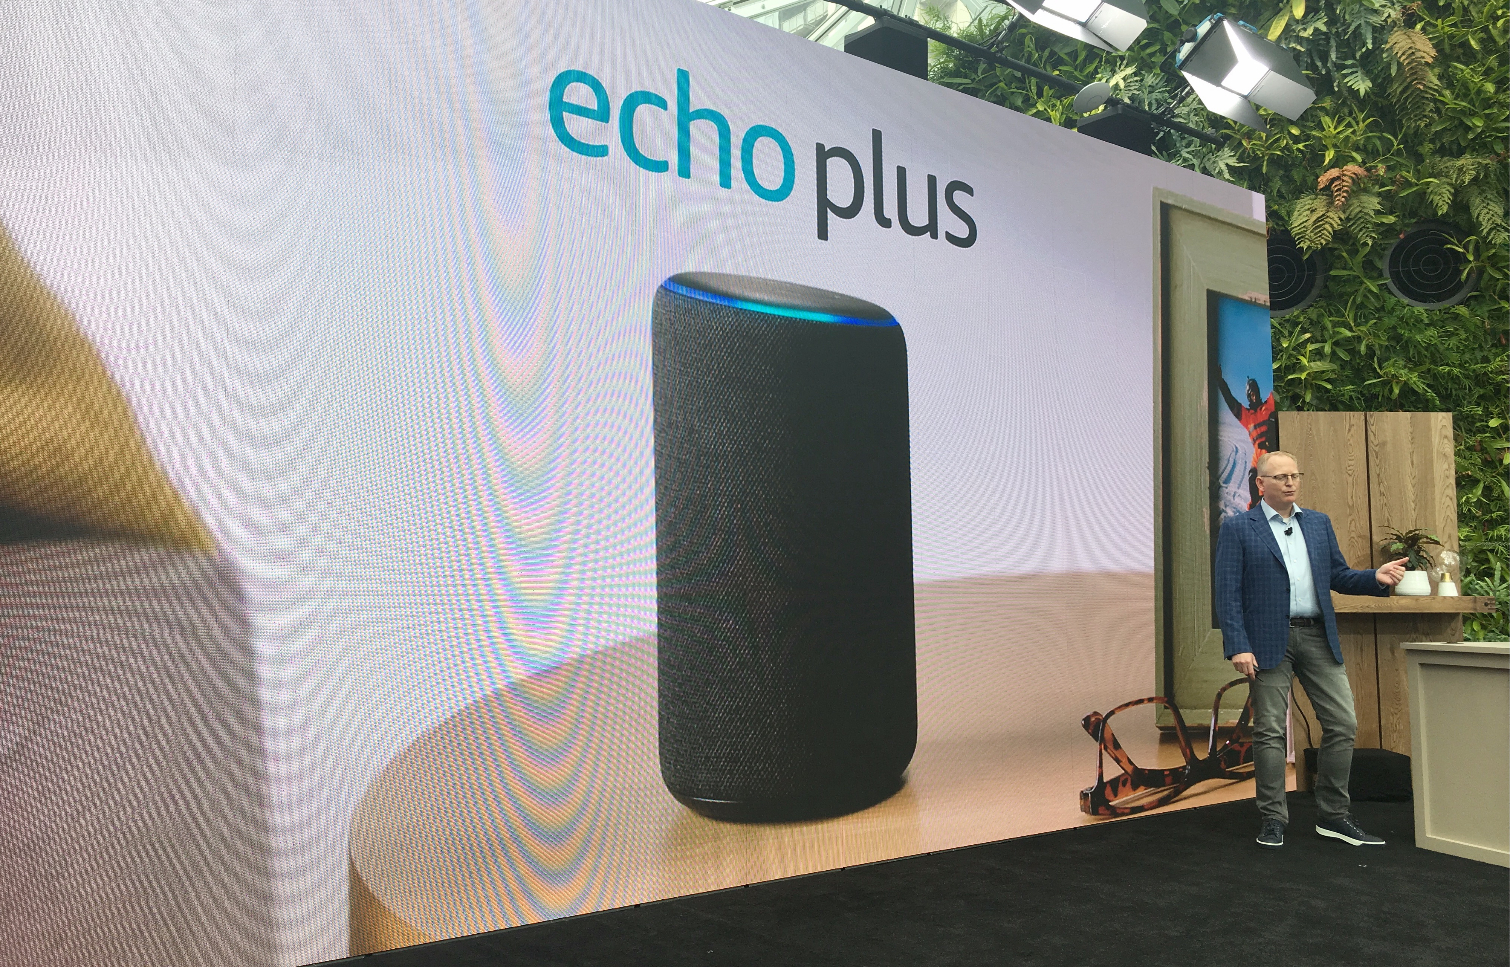 can echo work without internet